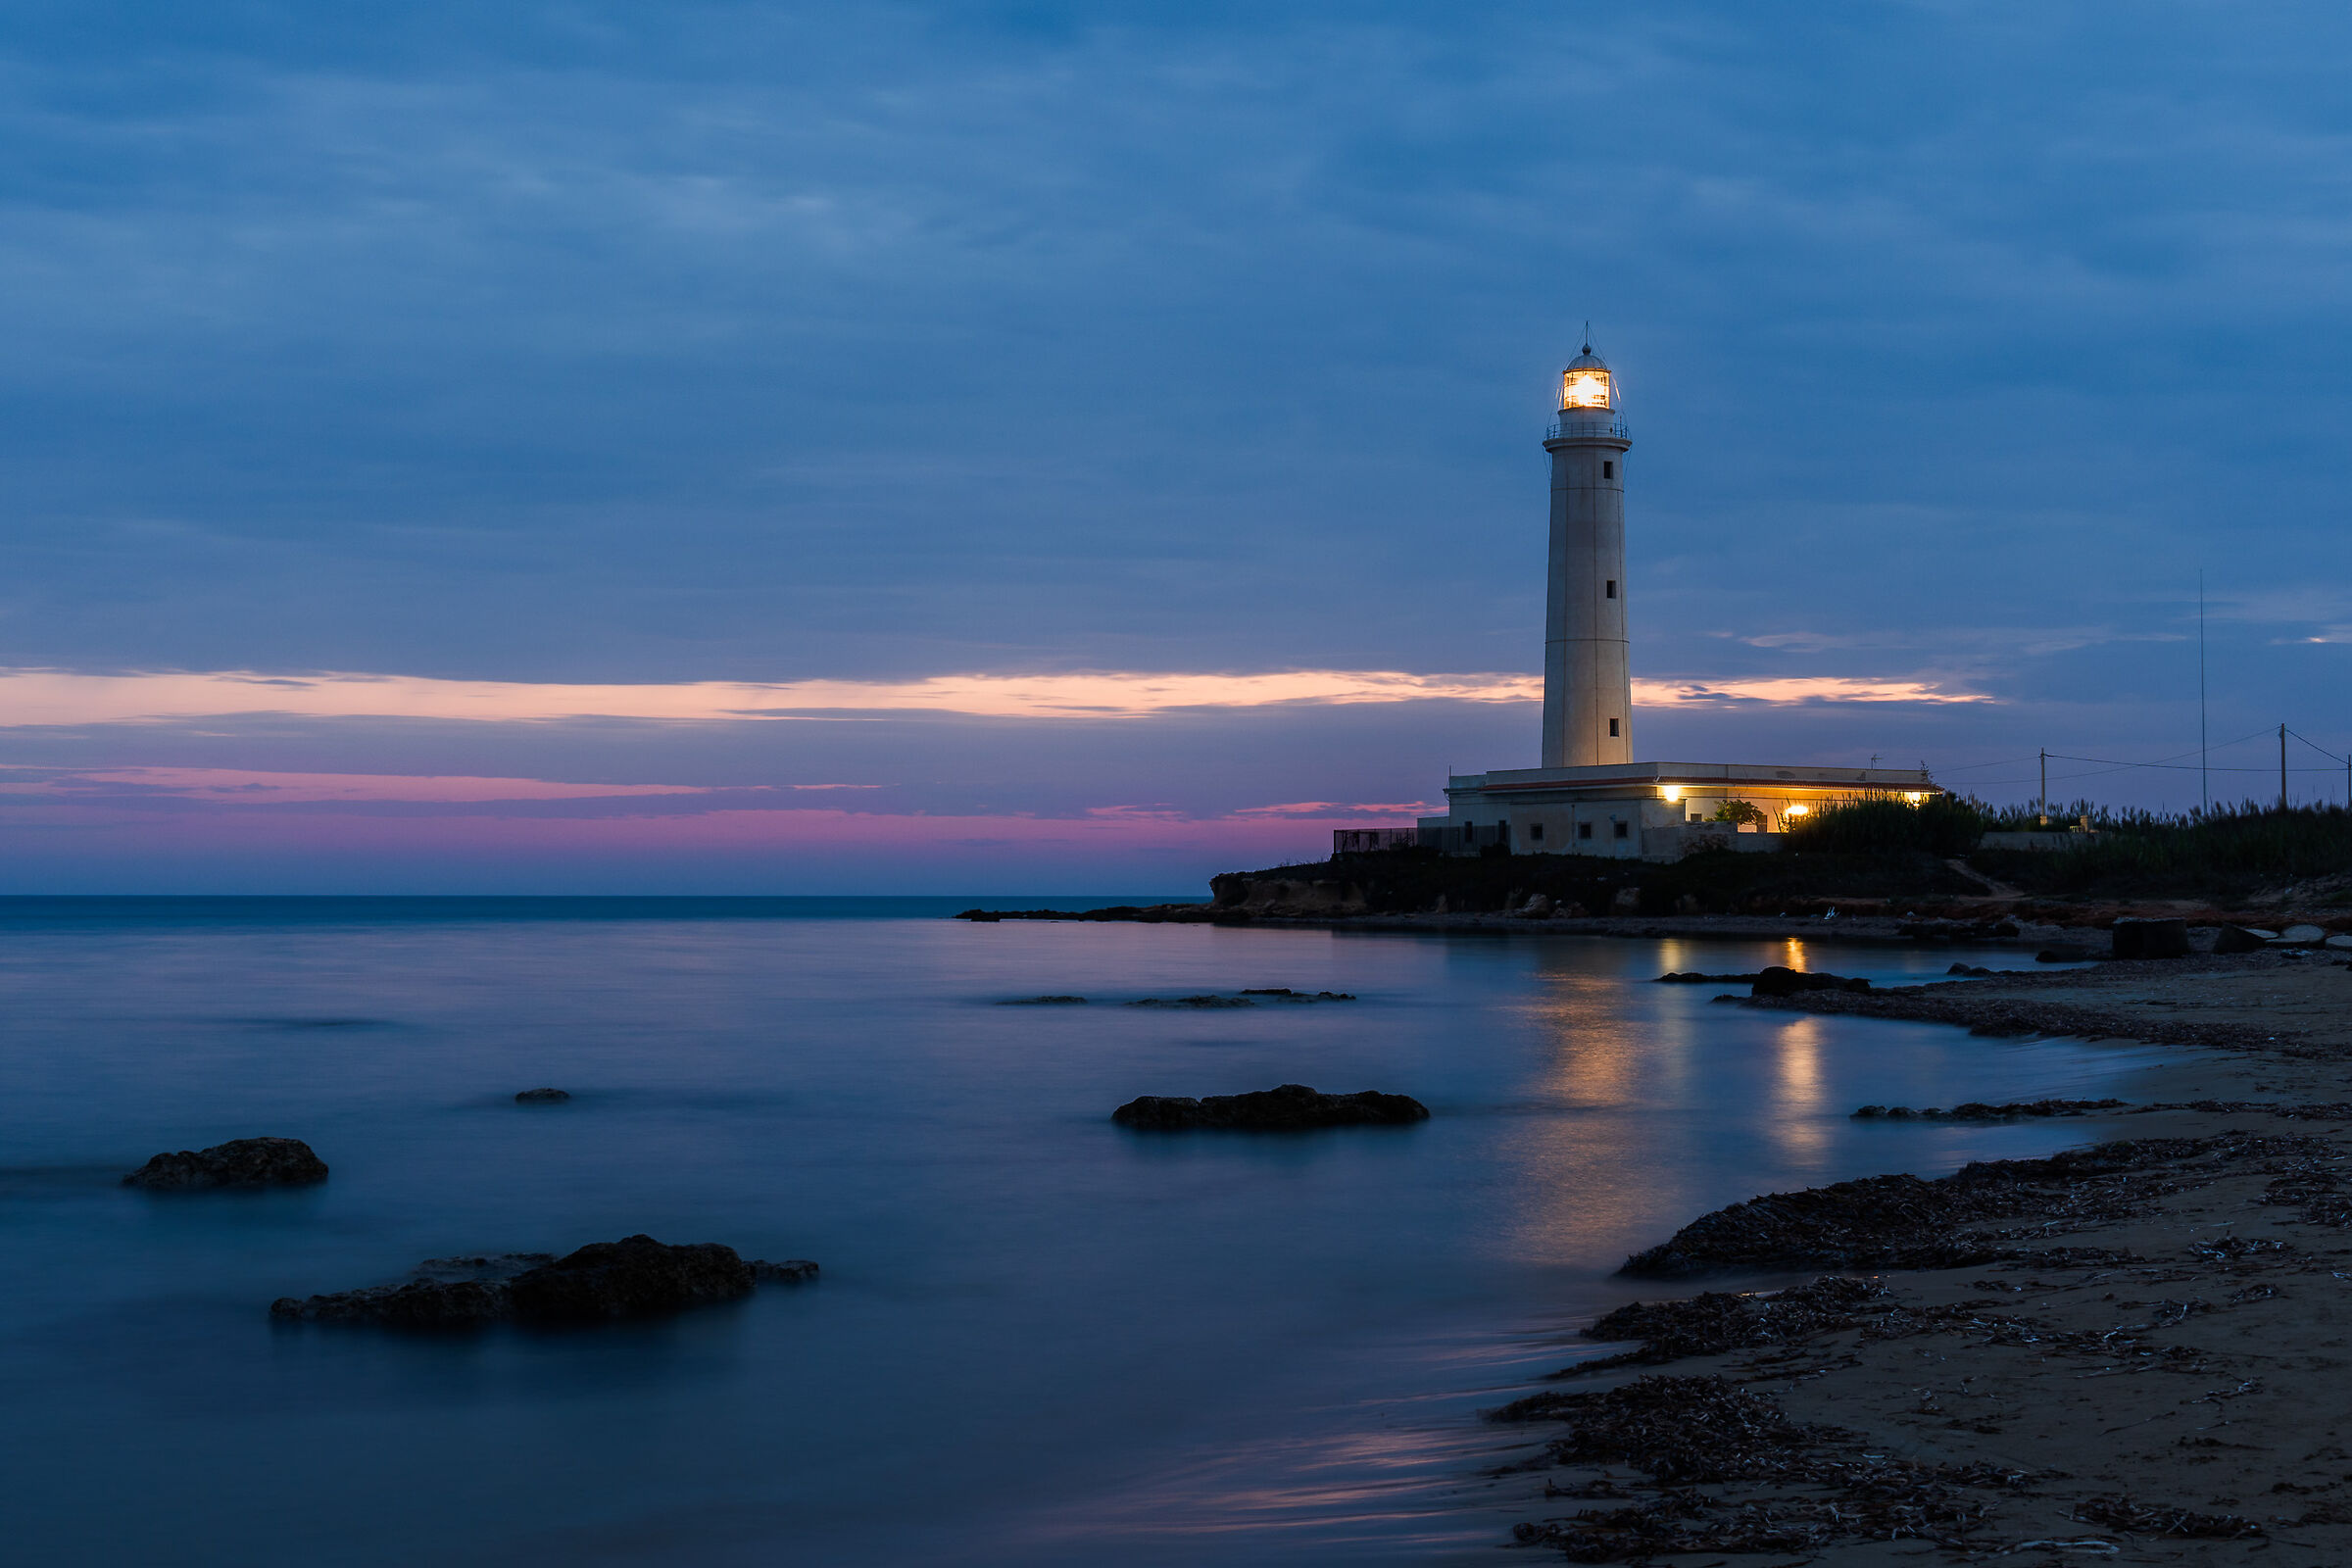 The lighthouse at blue hour...